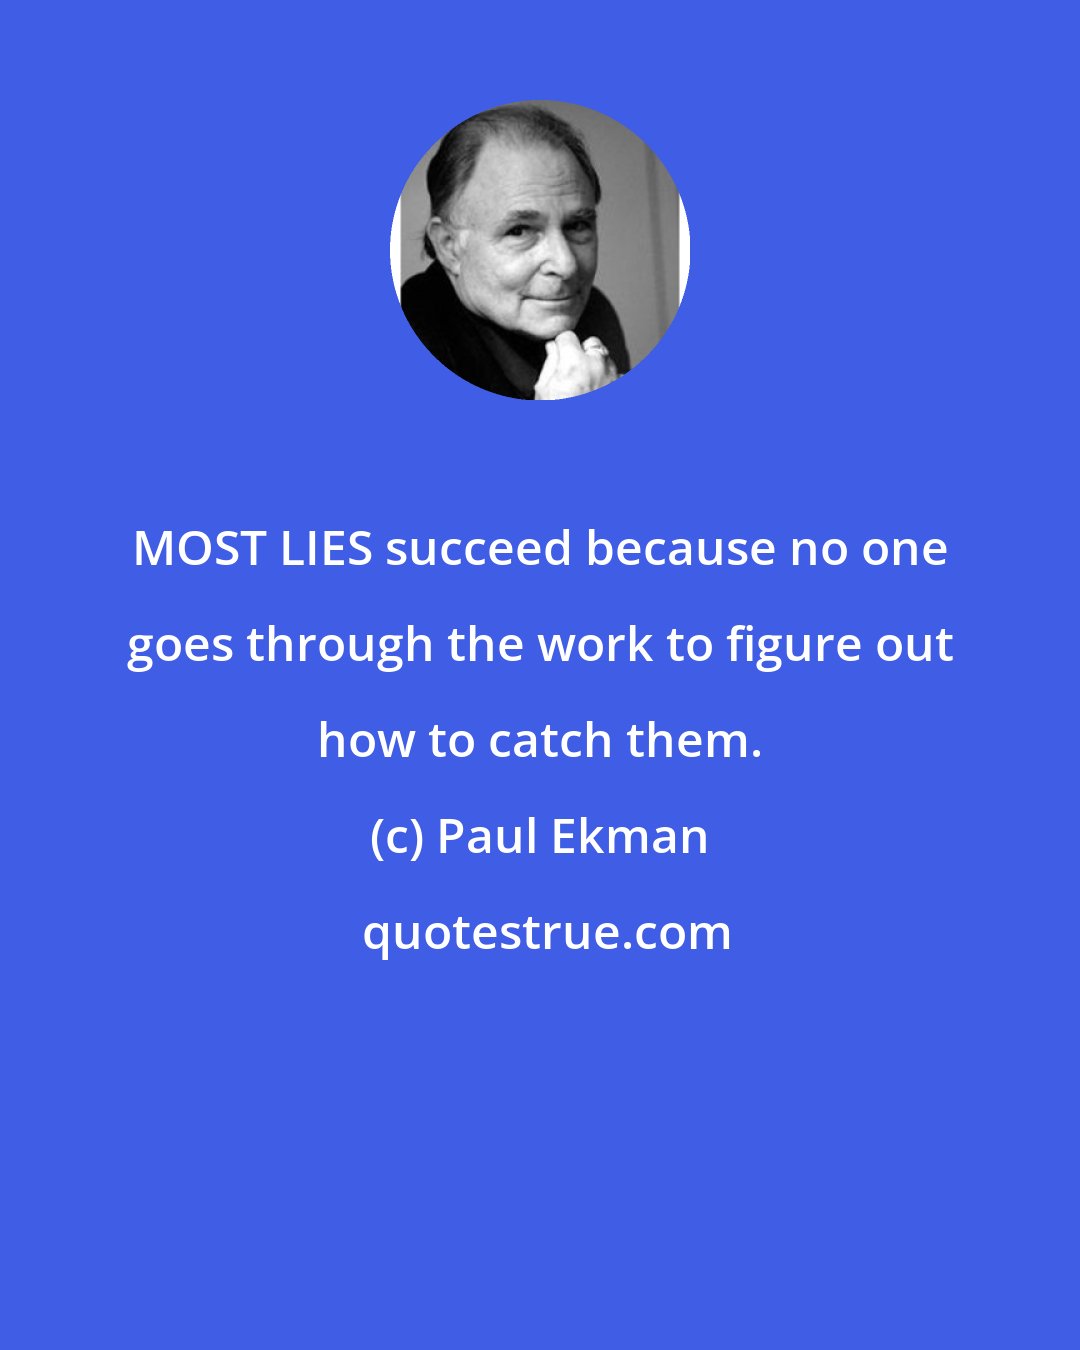 Paul Ekman: MOST LIES succeed because no one goes through the work to figure out how to catch them.